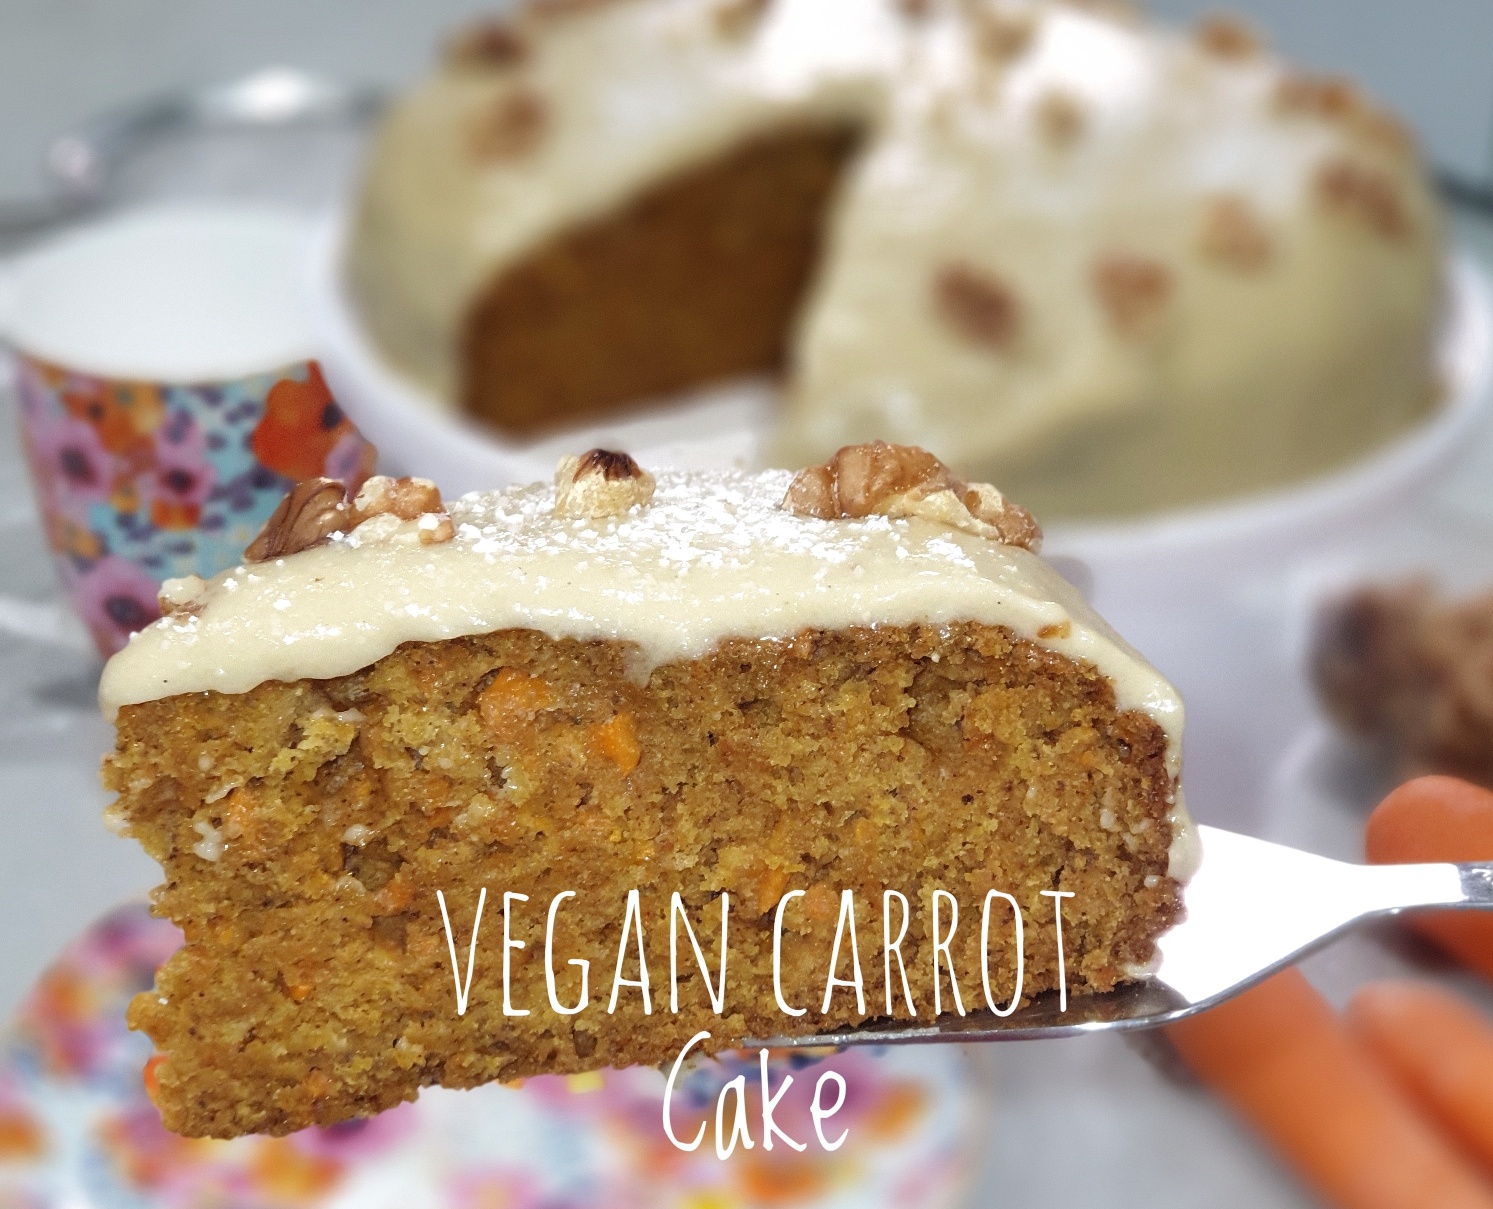 Carrot Cake with Cashew Butter Frosting